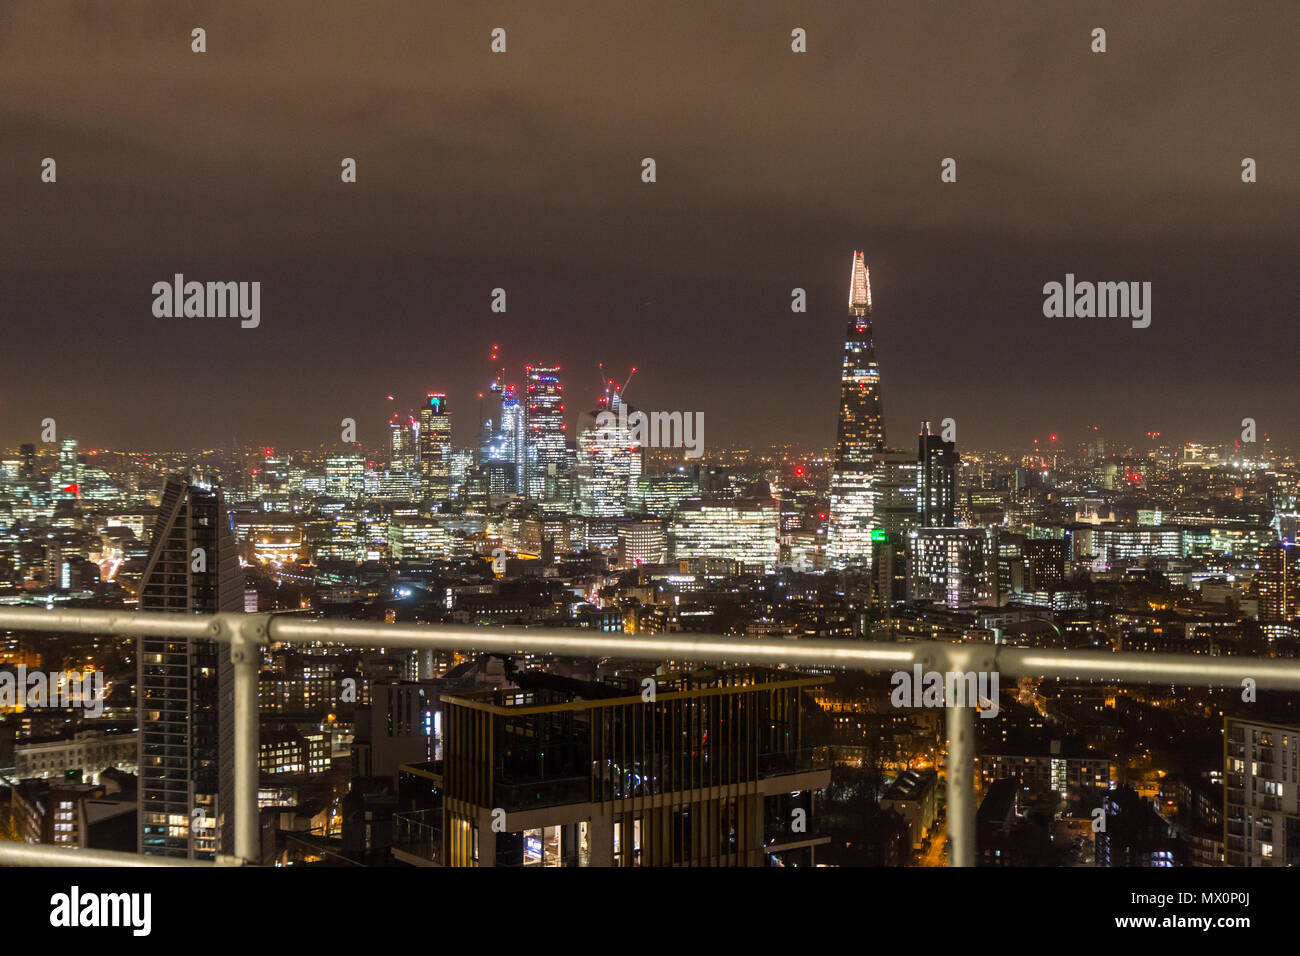 View of the City of London at night Stock Photo